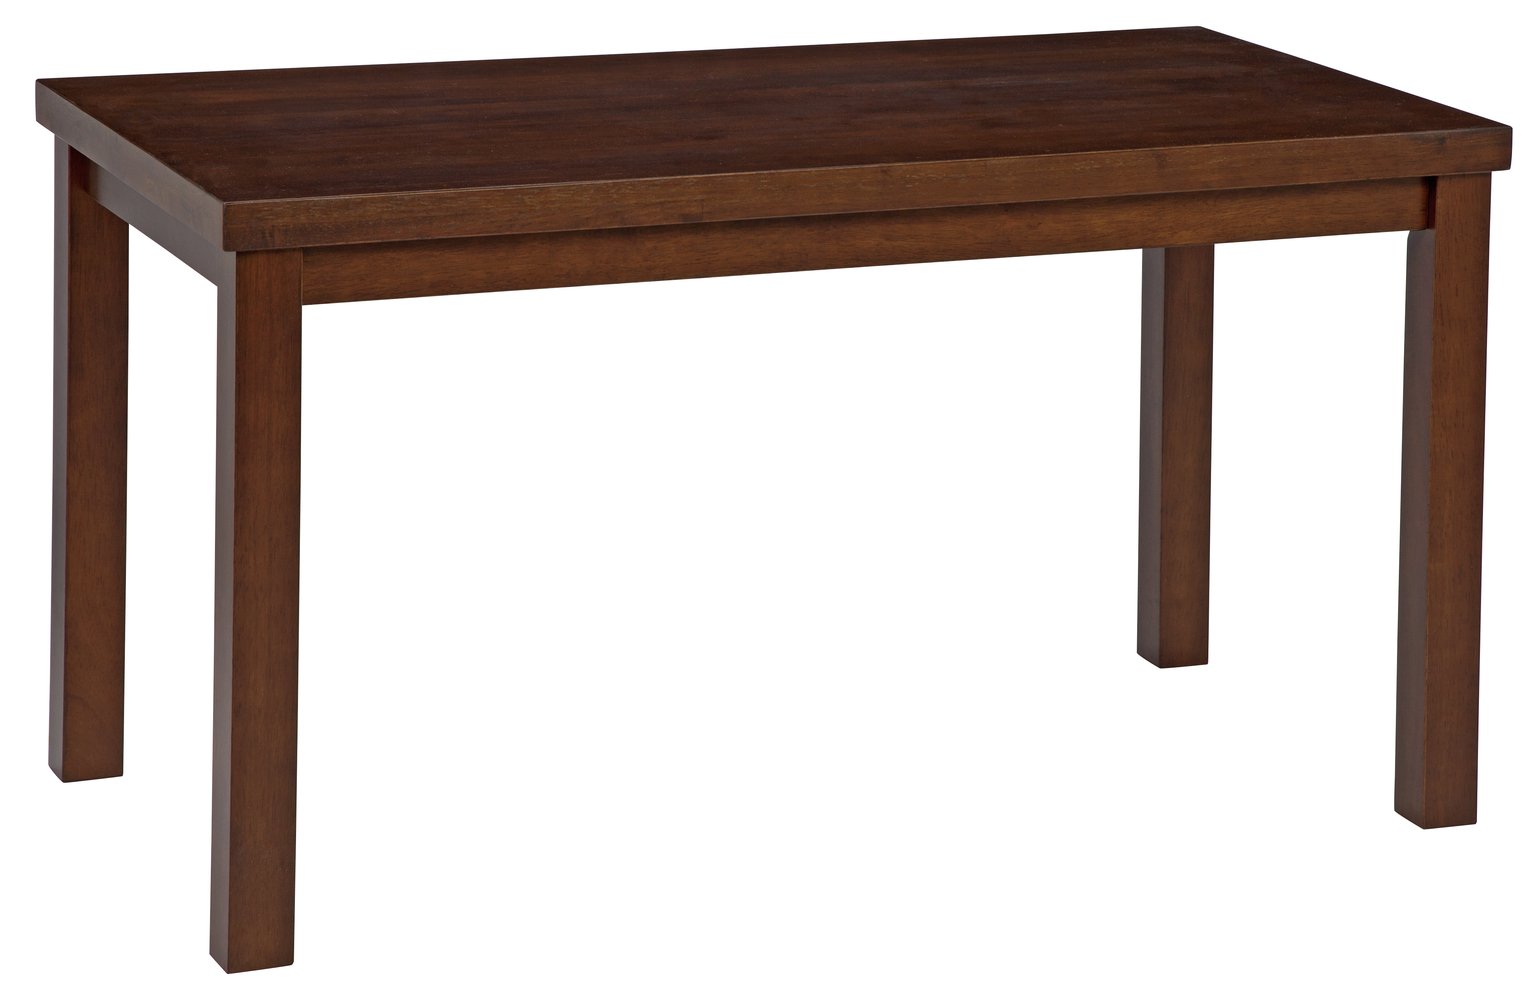 Argos Home Gloucester Solid Wood Coffee Table -Walnut Effect